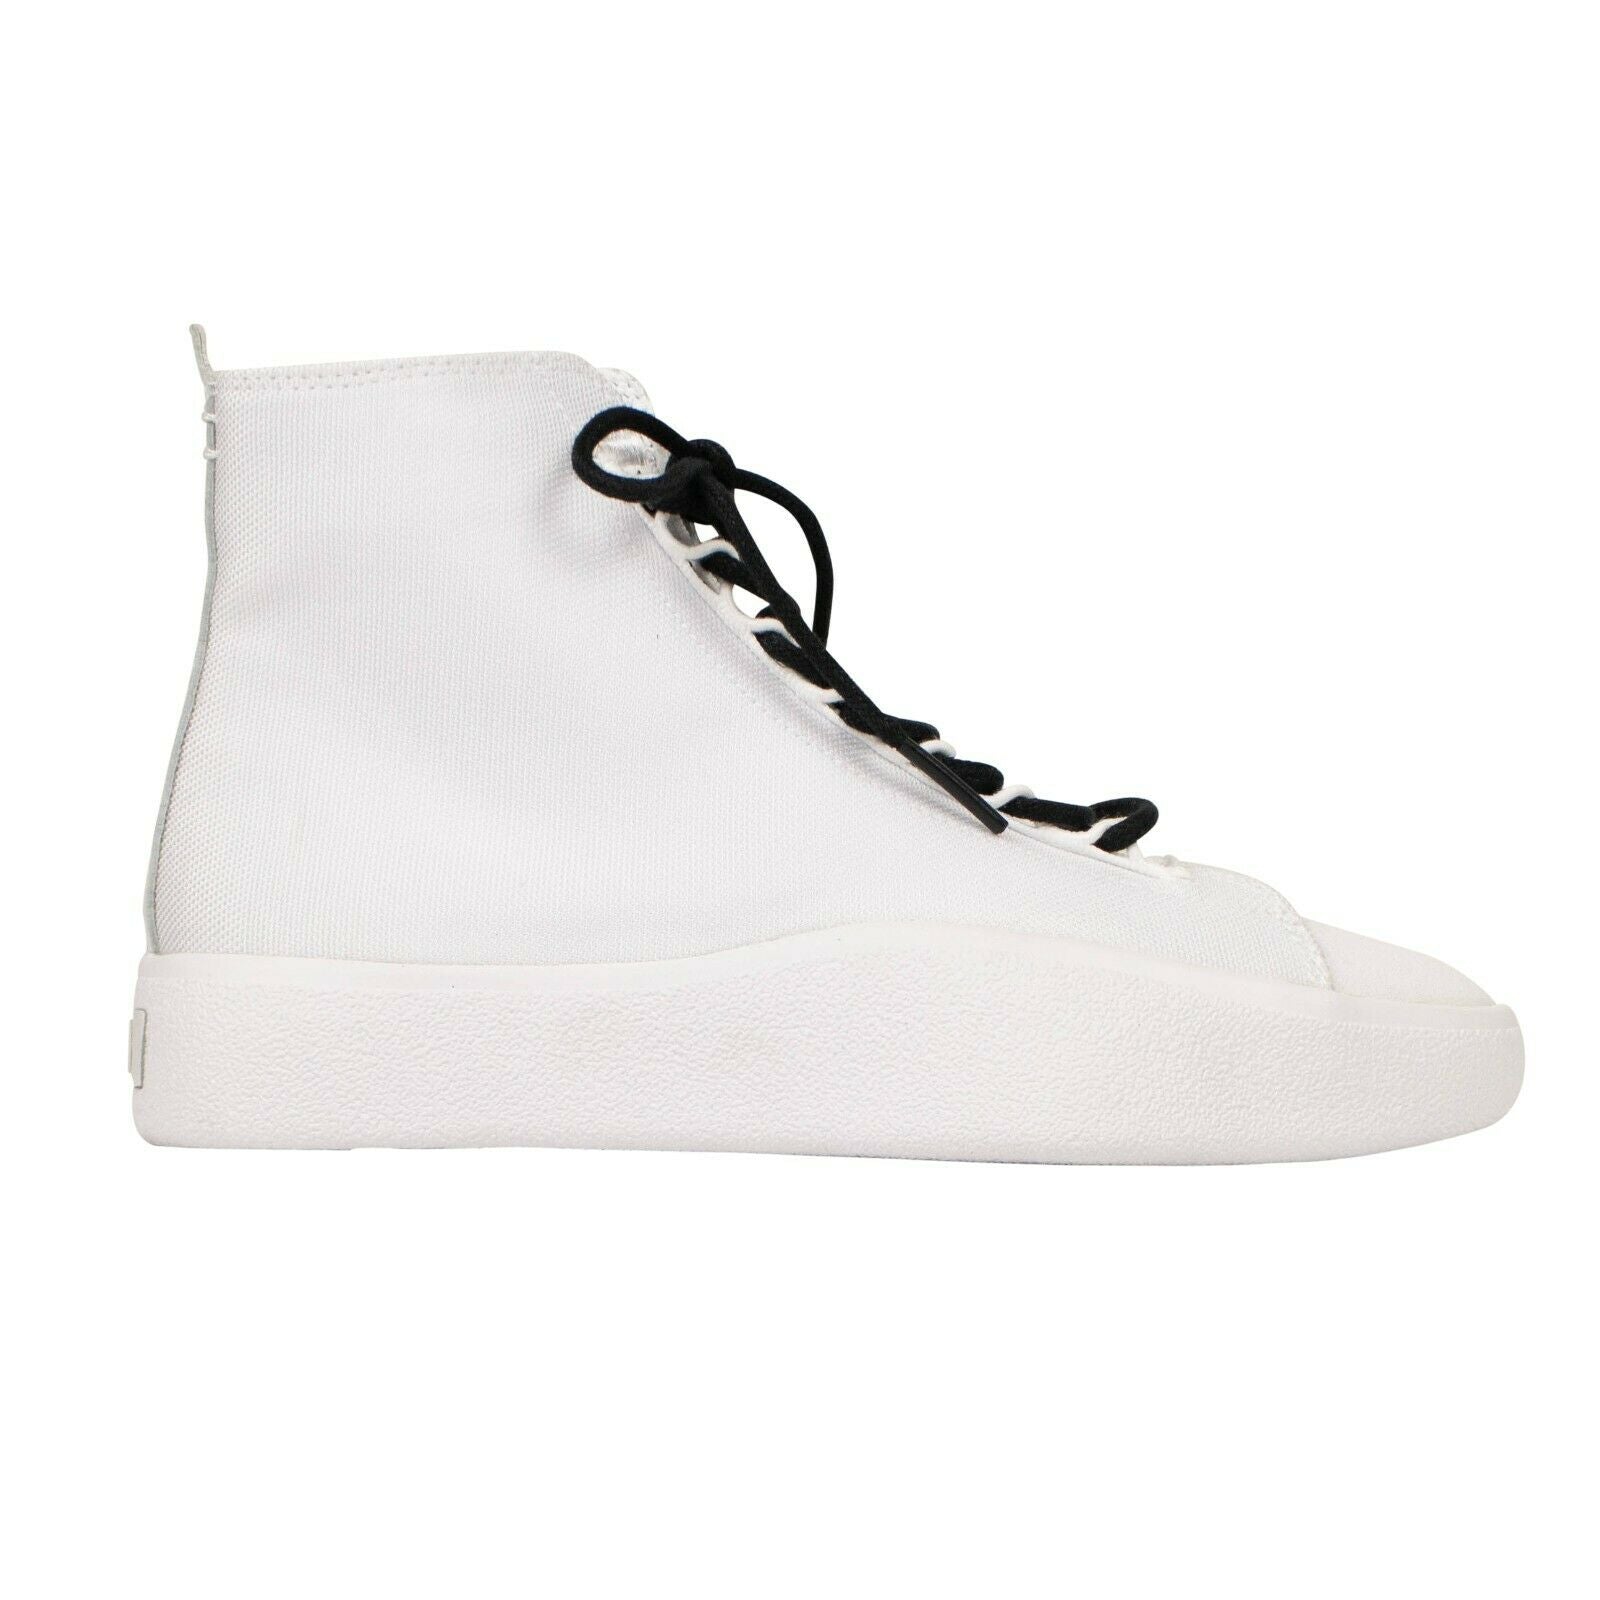 Y-3 Adidas 'Bashyo' High-Top Canvas Sneakers - White